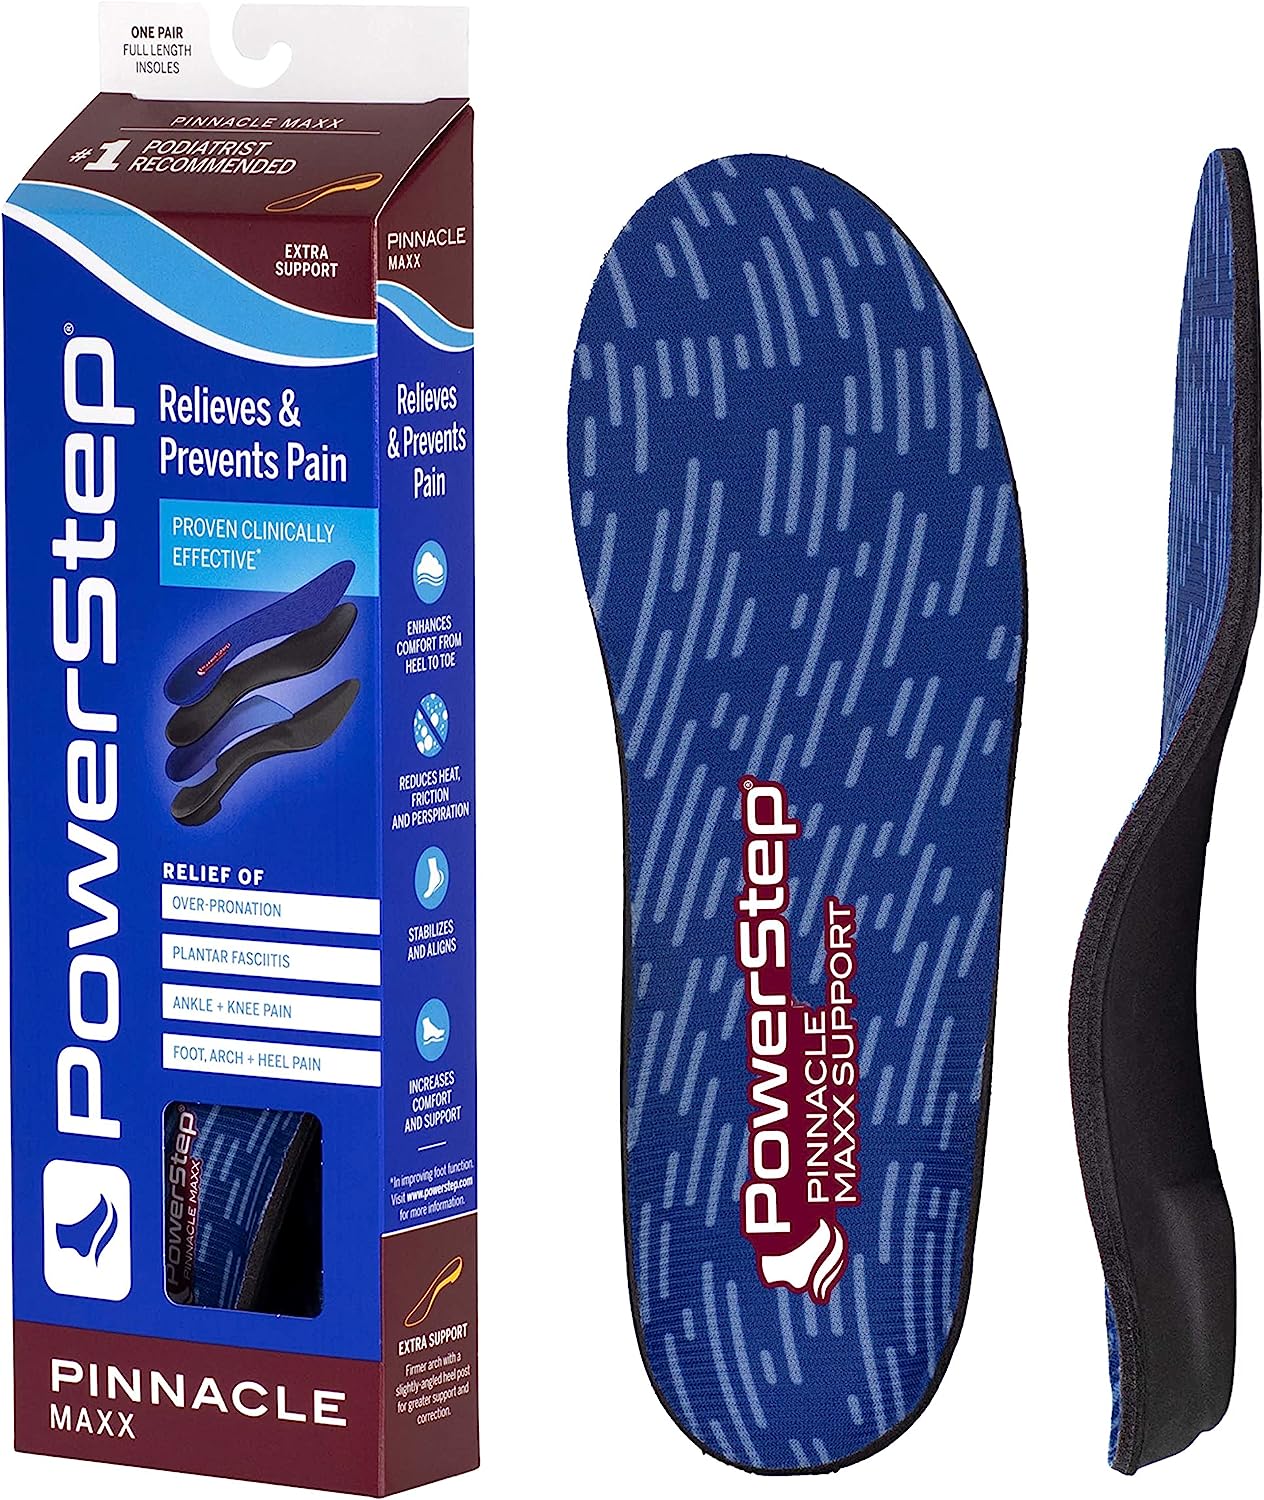 Powerstep Insoles, Pinnacle Maxx, Over-Pronation [...]